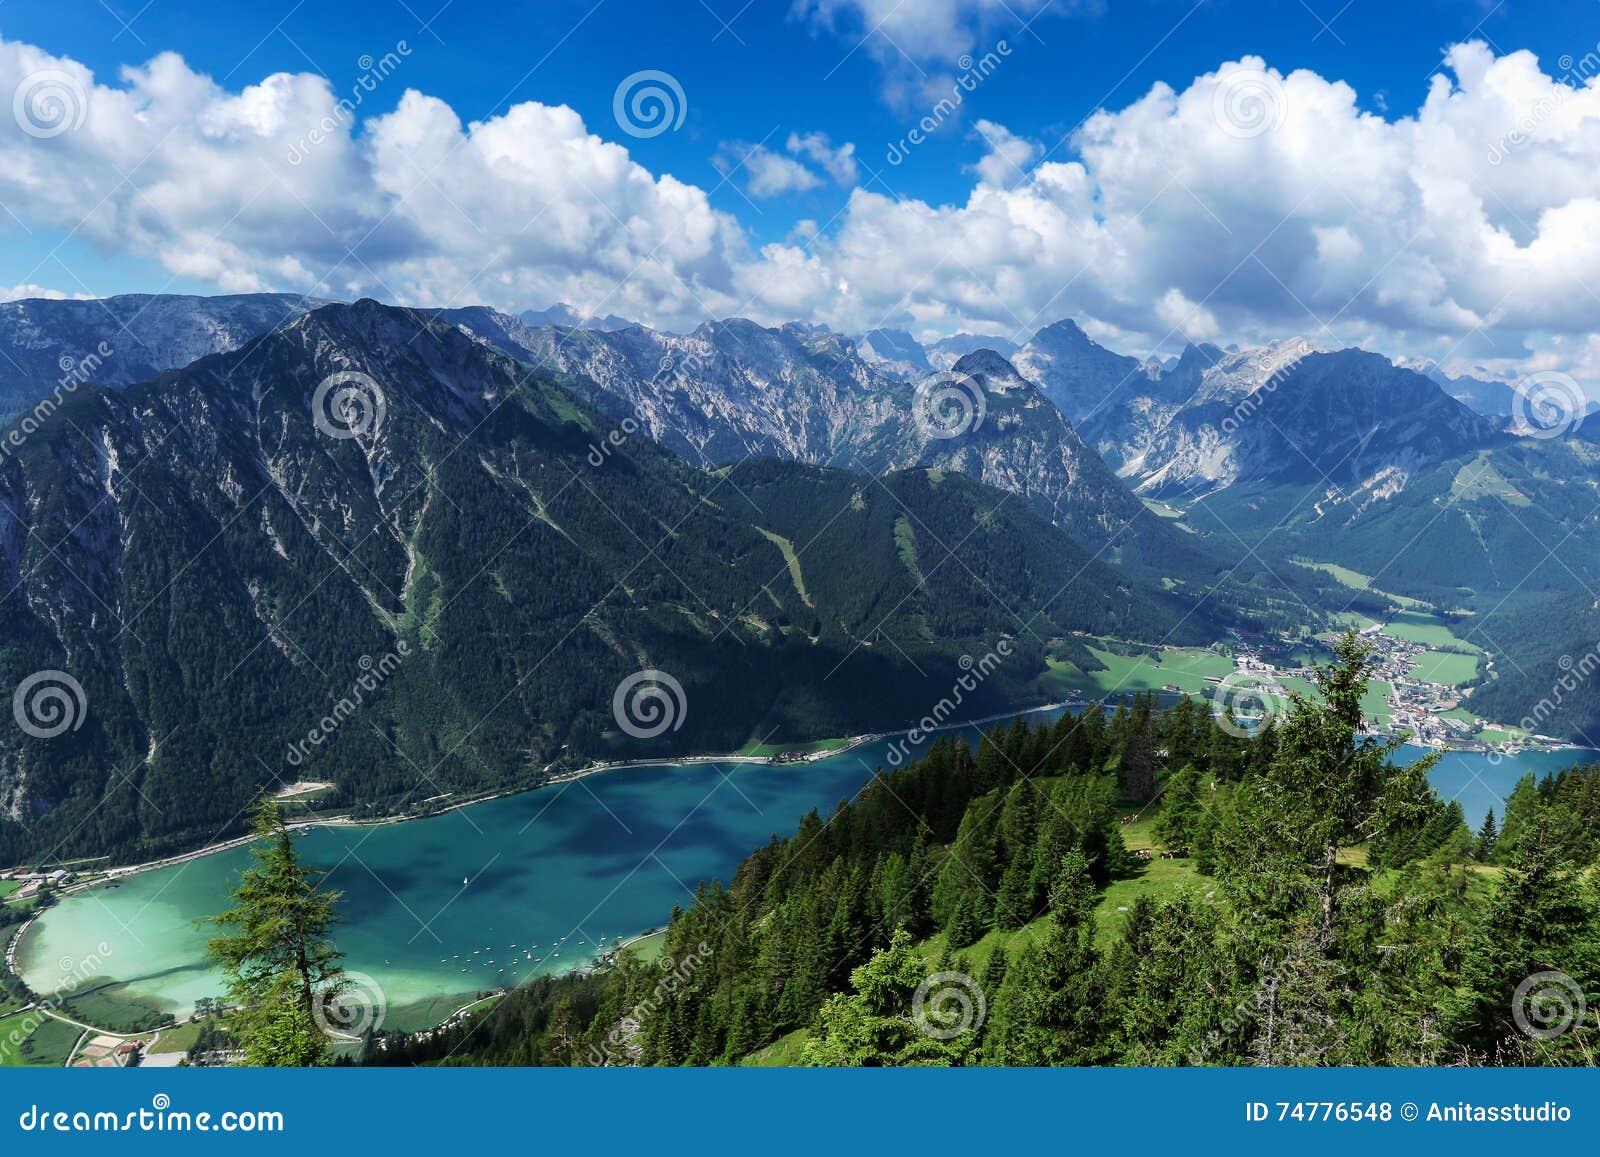 aerial view of blue mountain lake between forested rocky mountains. achensee, austria, tyrol